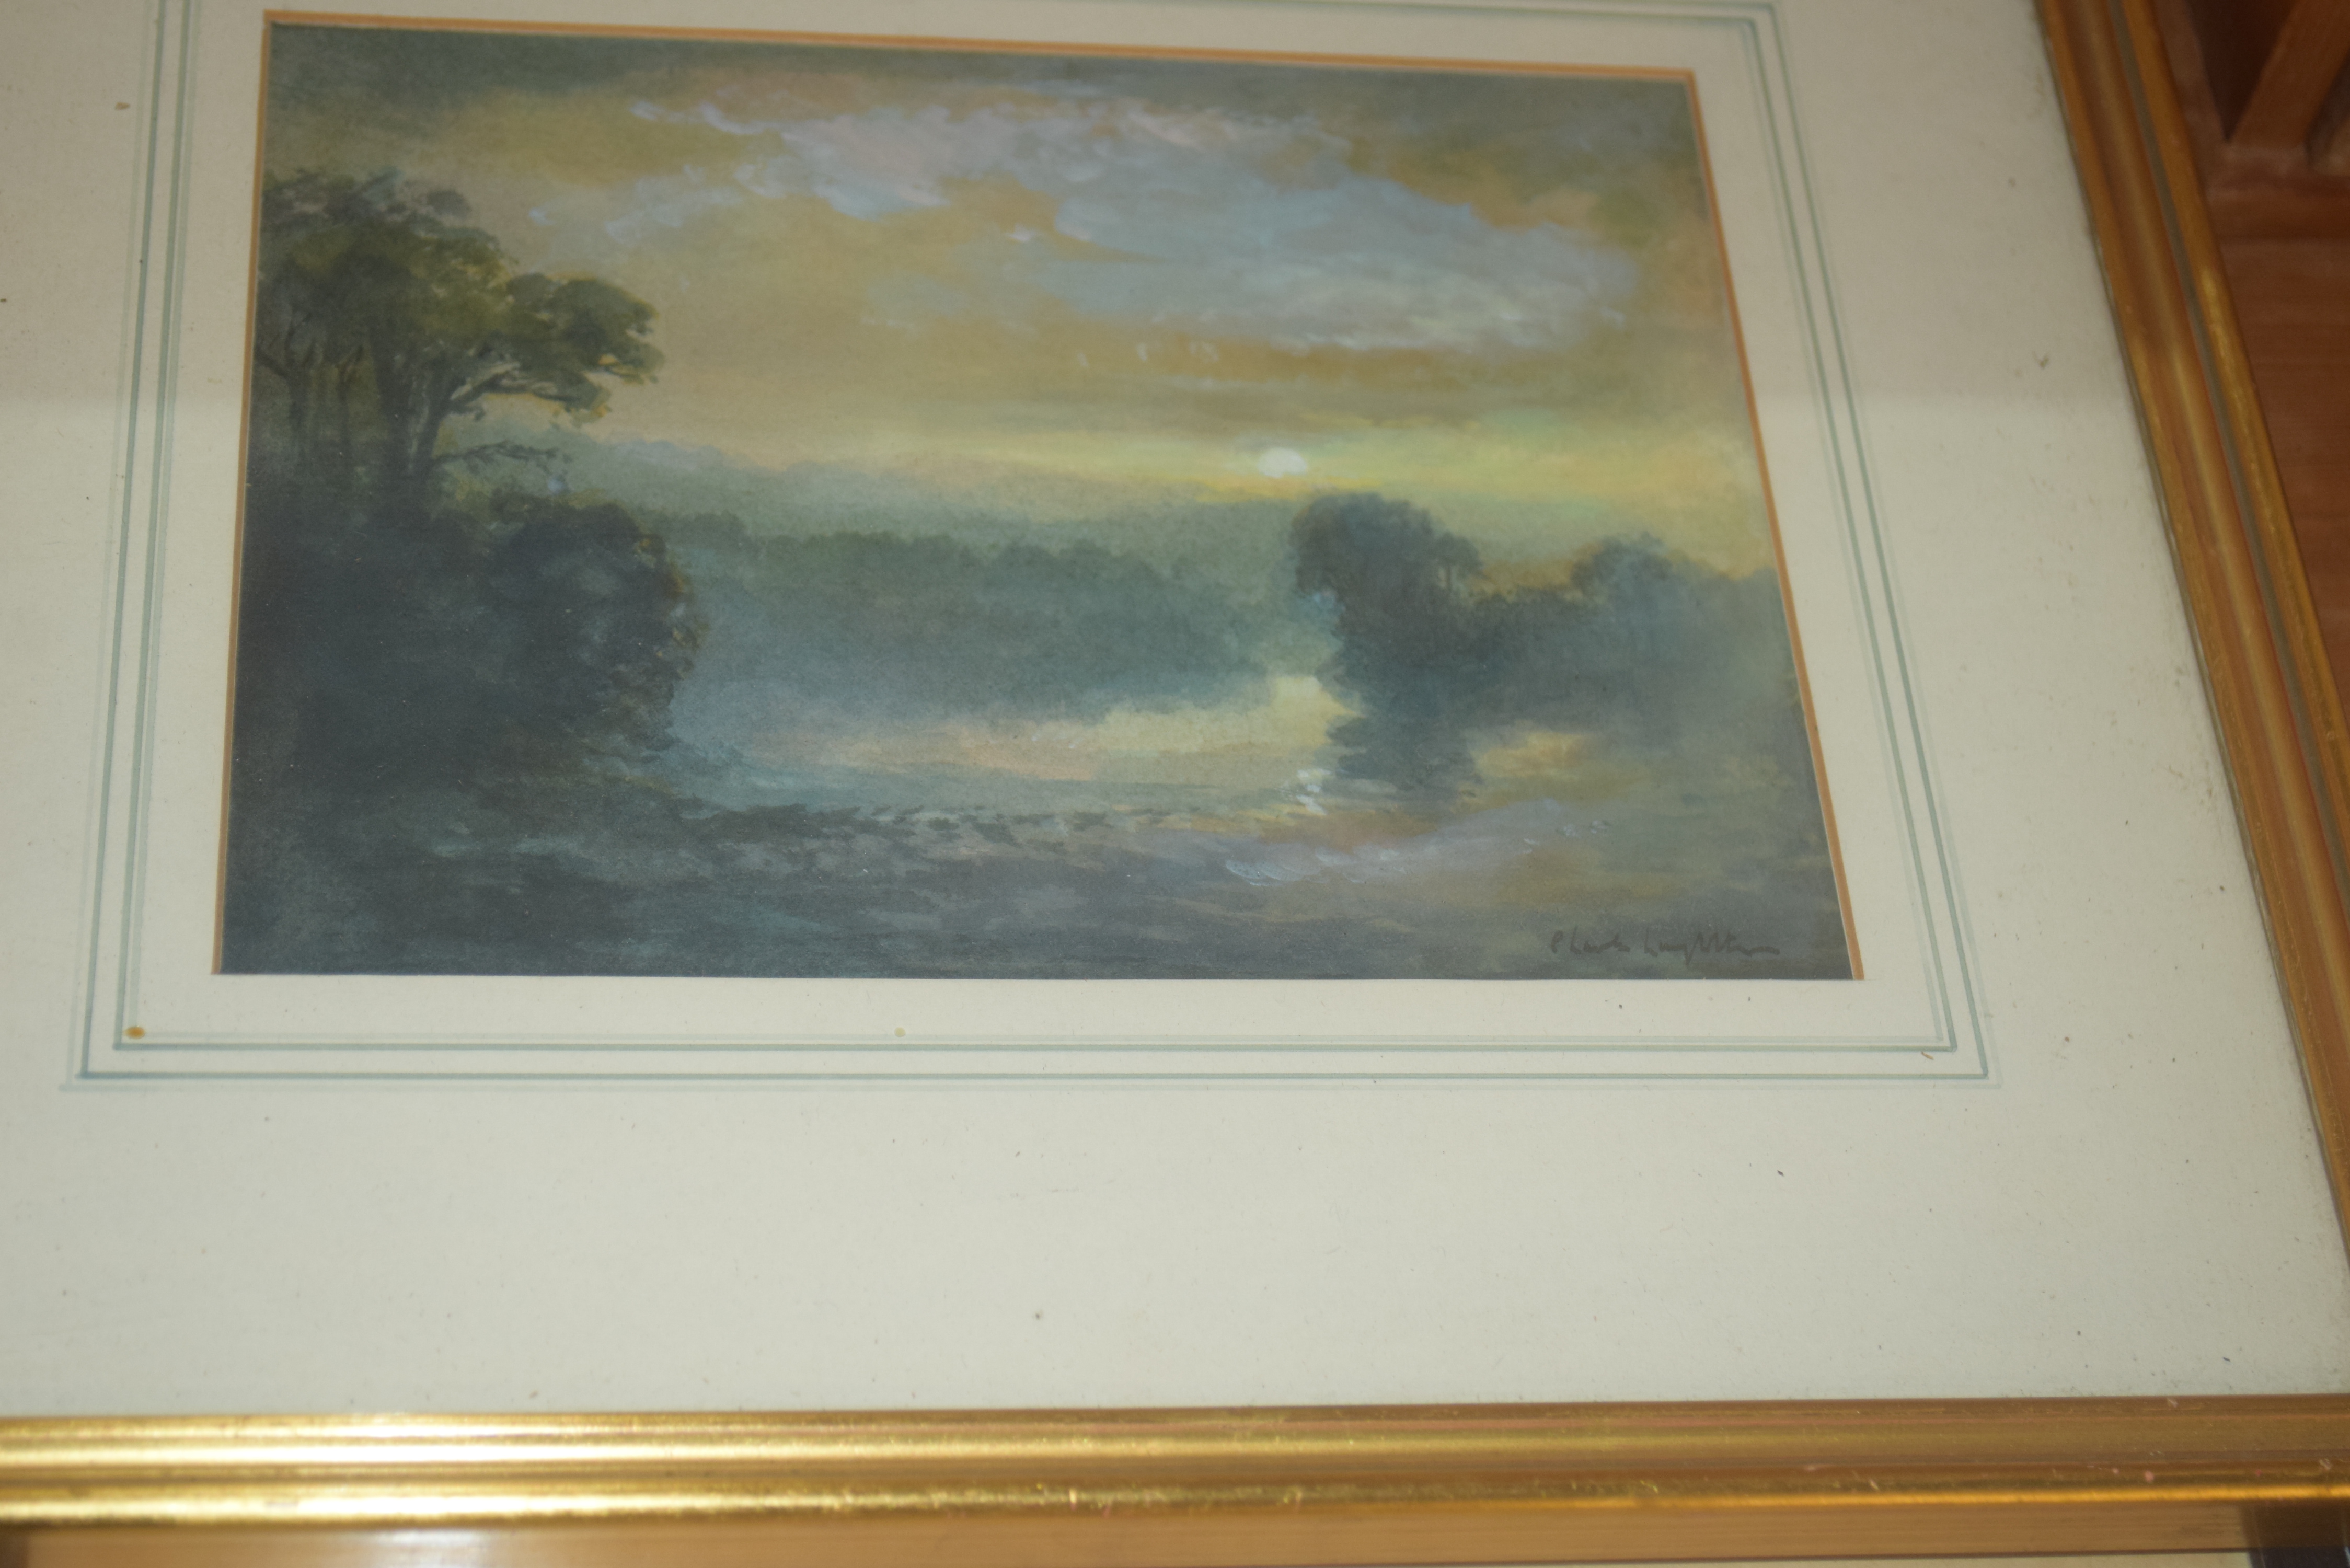 CHARLES LONGBOTHAM, LOCH AWE, WATERCOLOUR, TOGETHER WITH C NICHOLS, R.E., ETCHING OF A WOODLAND - Image 2 of 3